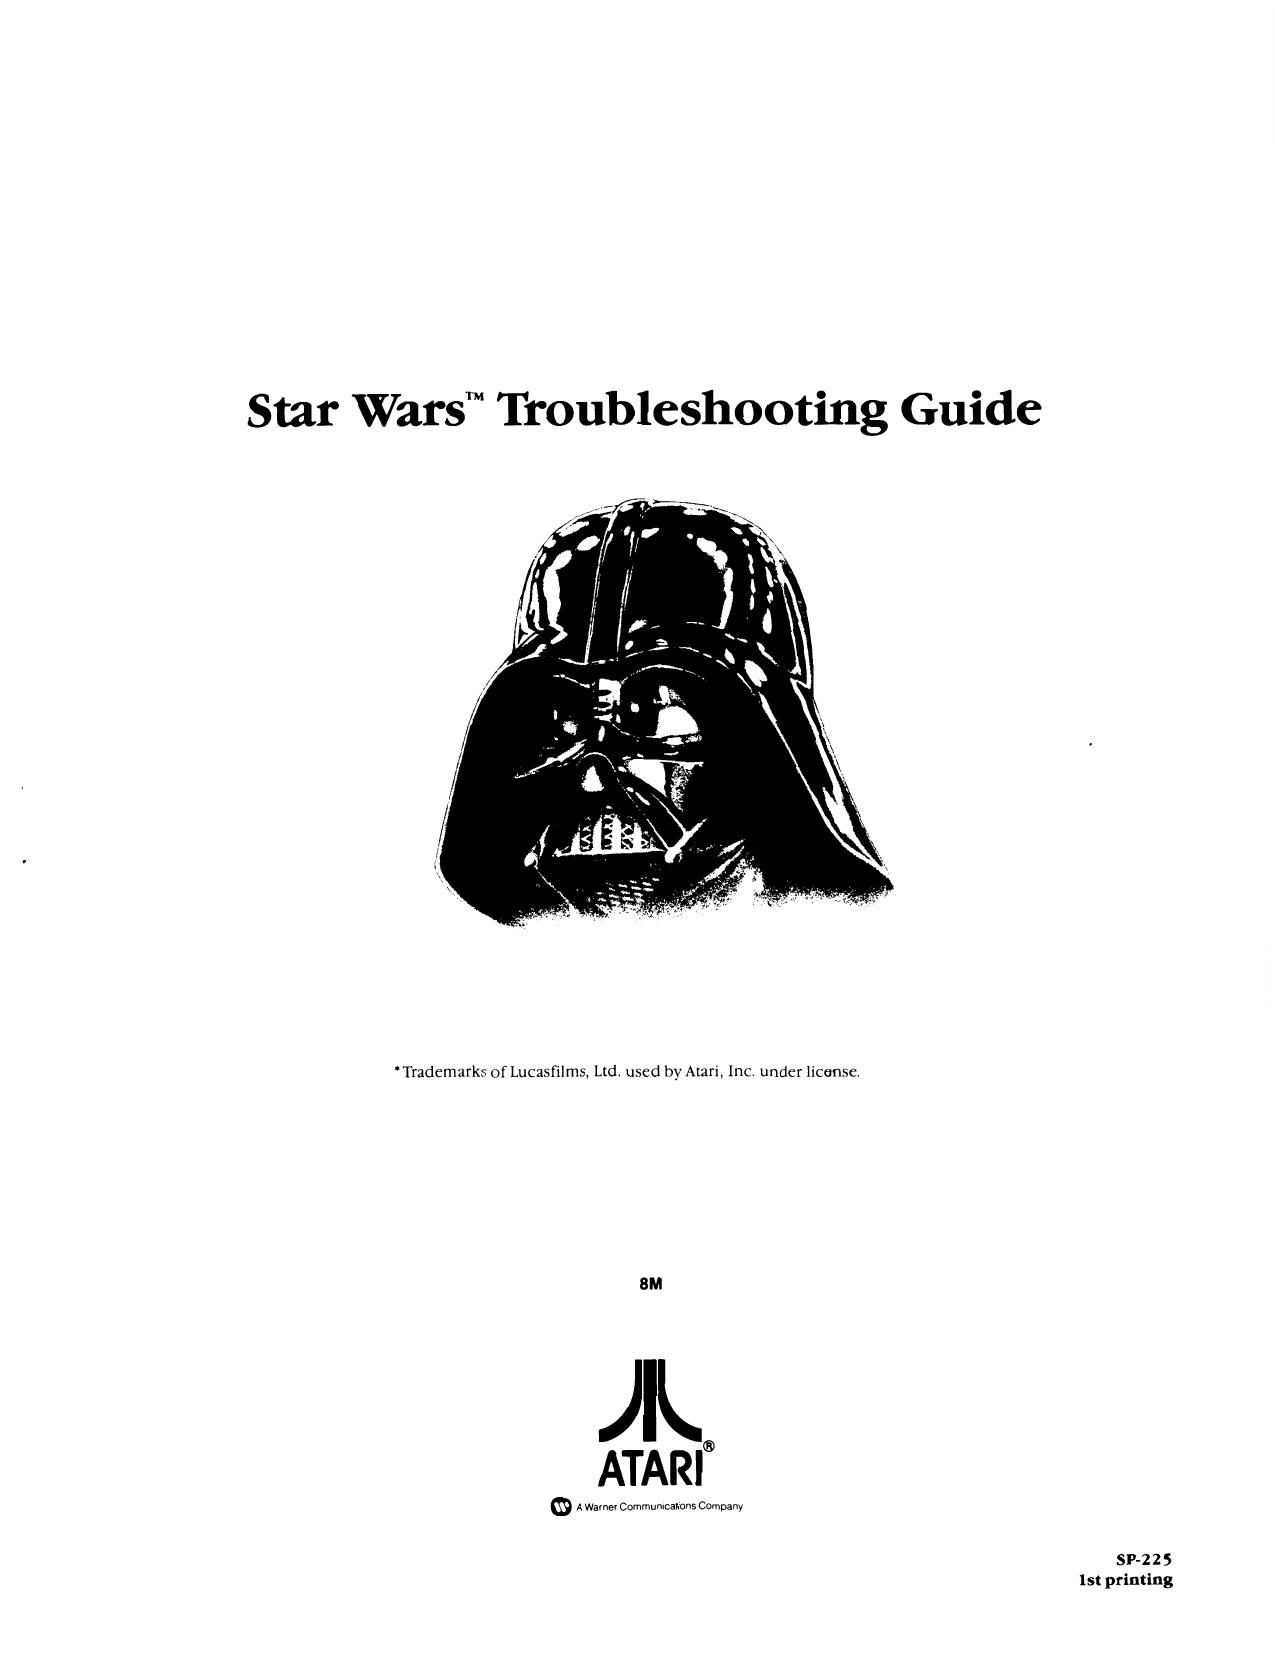 Star Wars SP-225 1st Printing Troubleshooting Guide